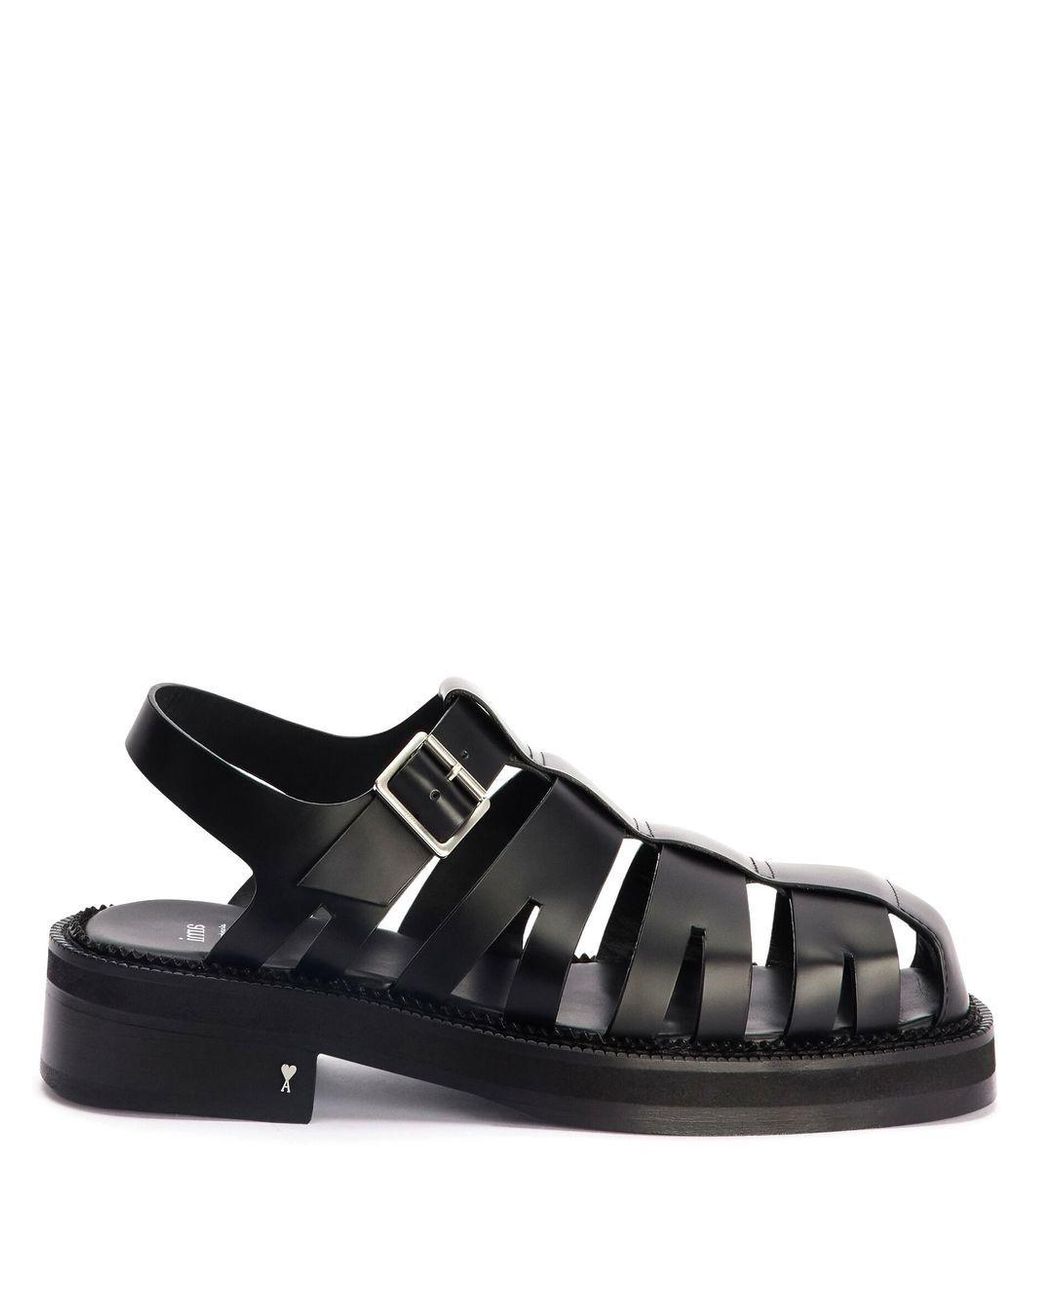 Ami Paris Caged Leather Sandals in Black | Lyst